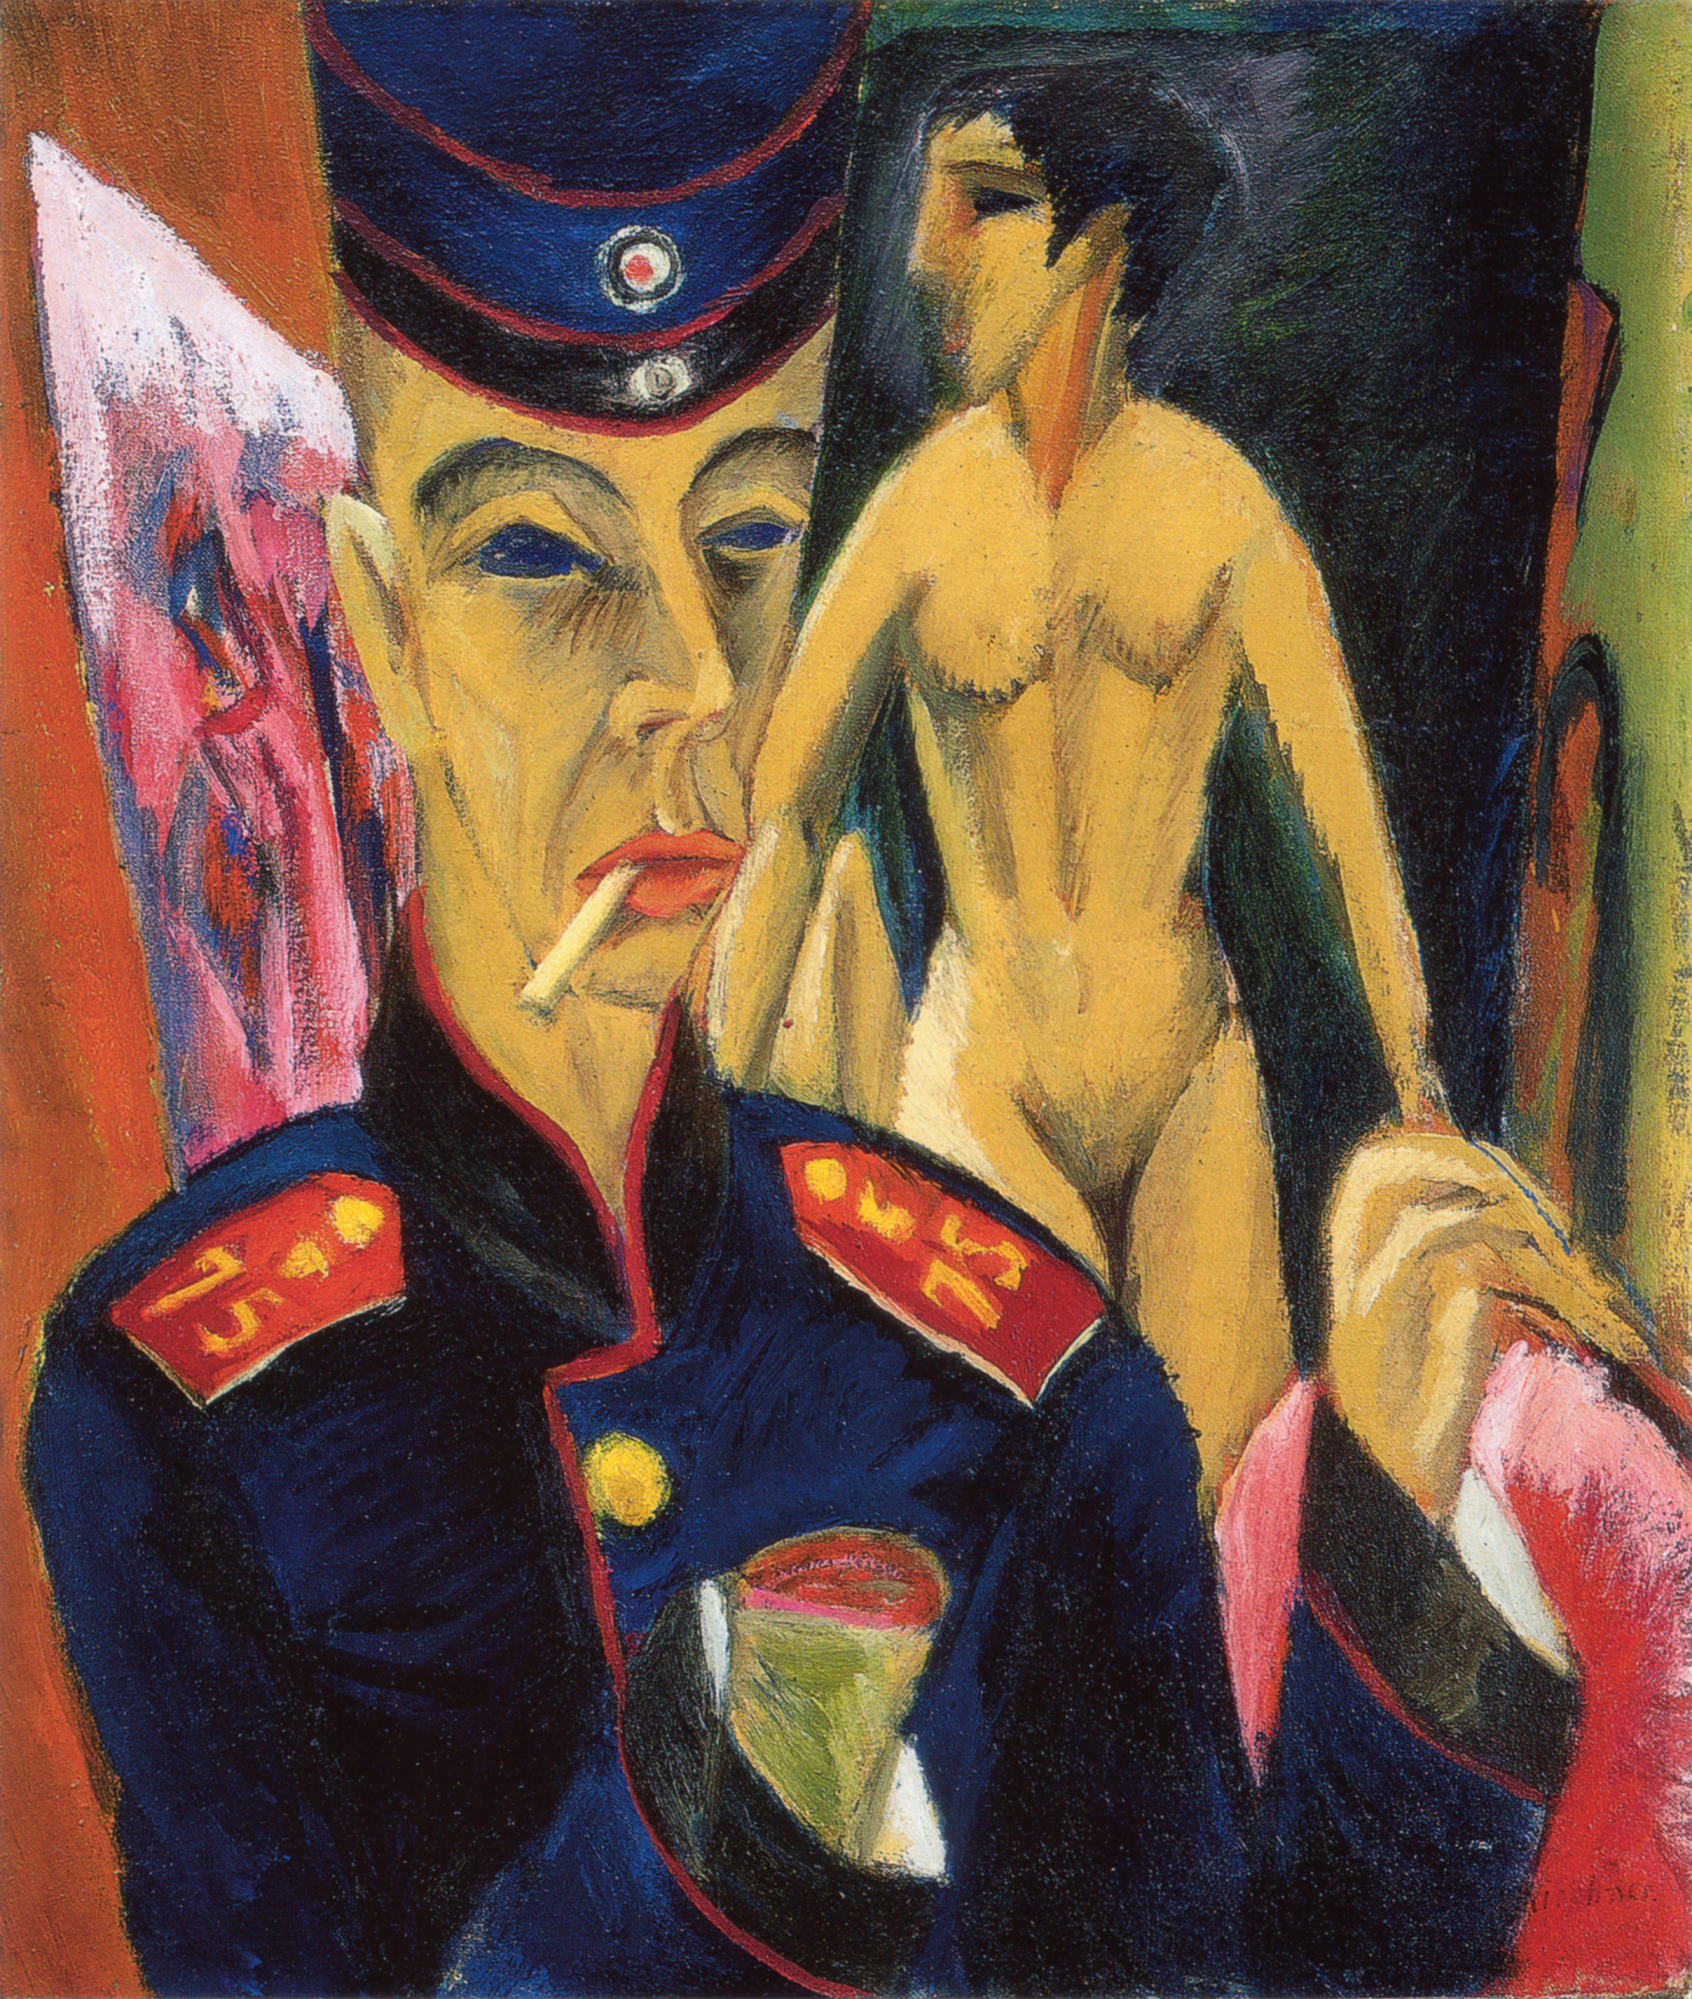 Ernst Ludwig Kirchner, Self Portrait as an Artist, 1915, Oil on canvas. Oberlin College, Ohio. 